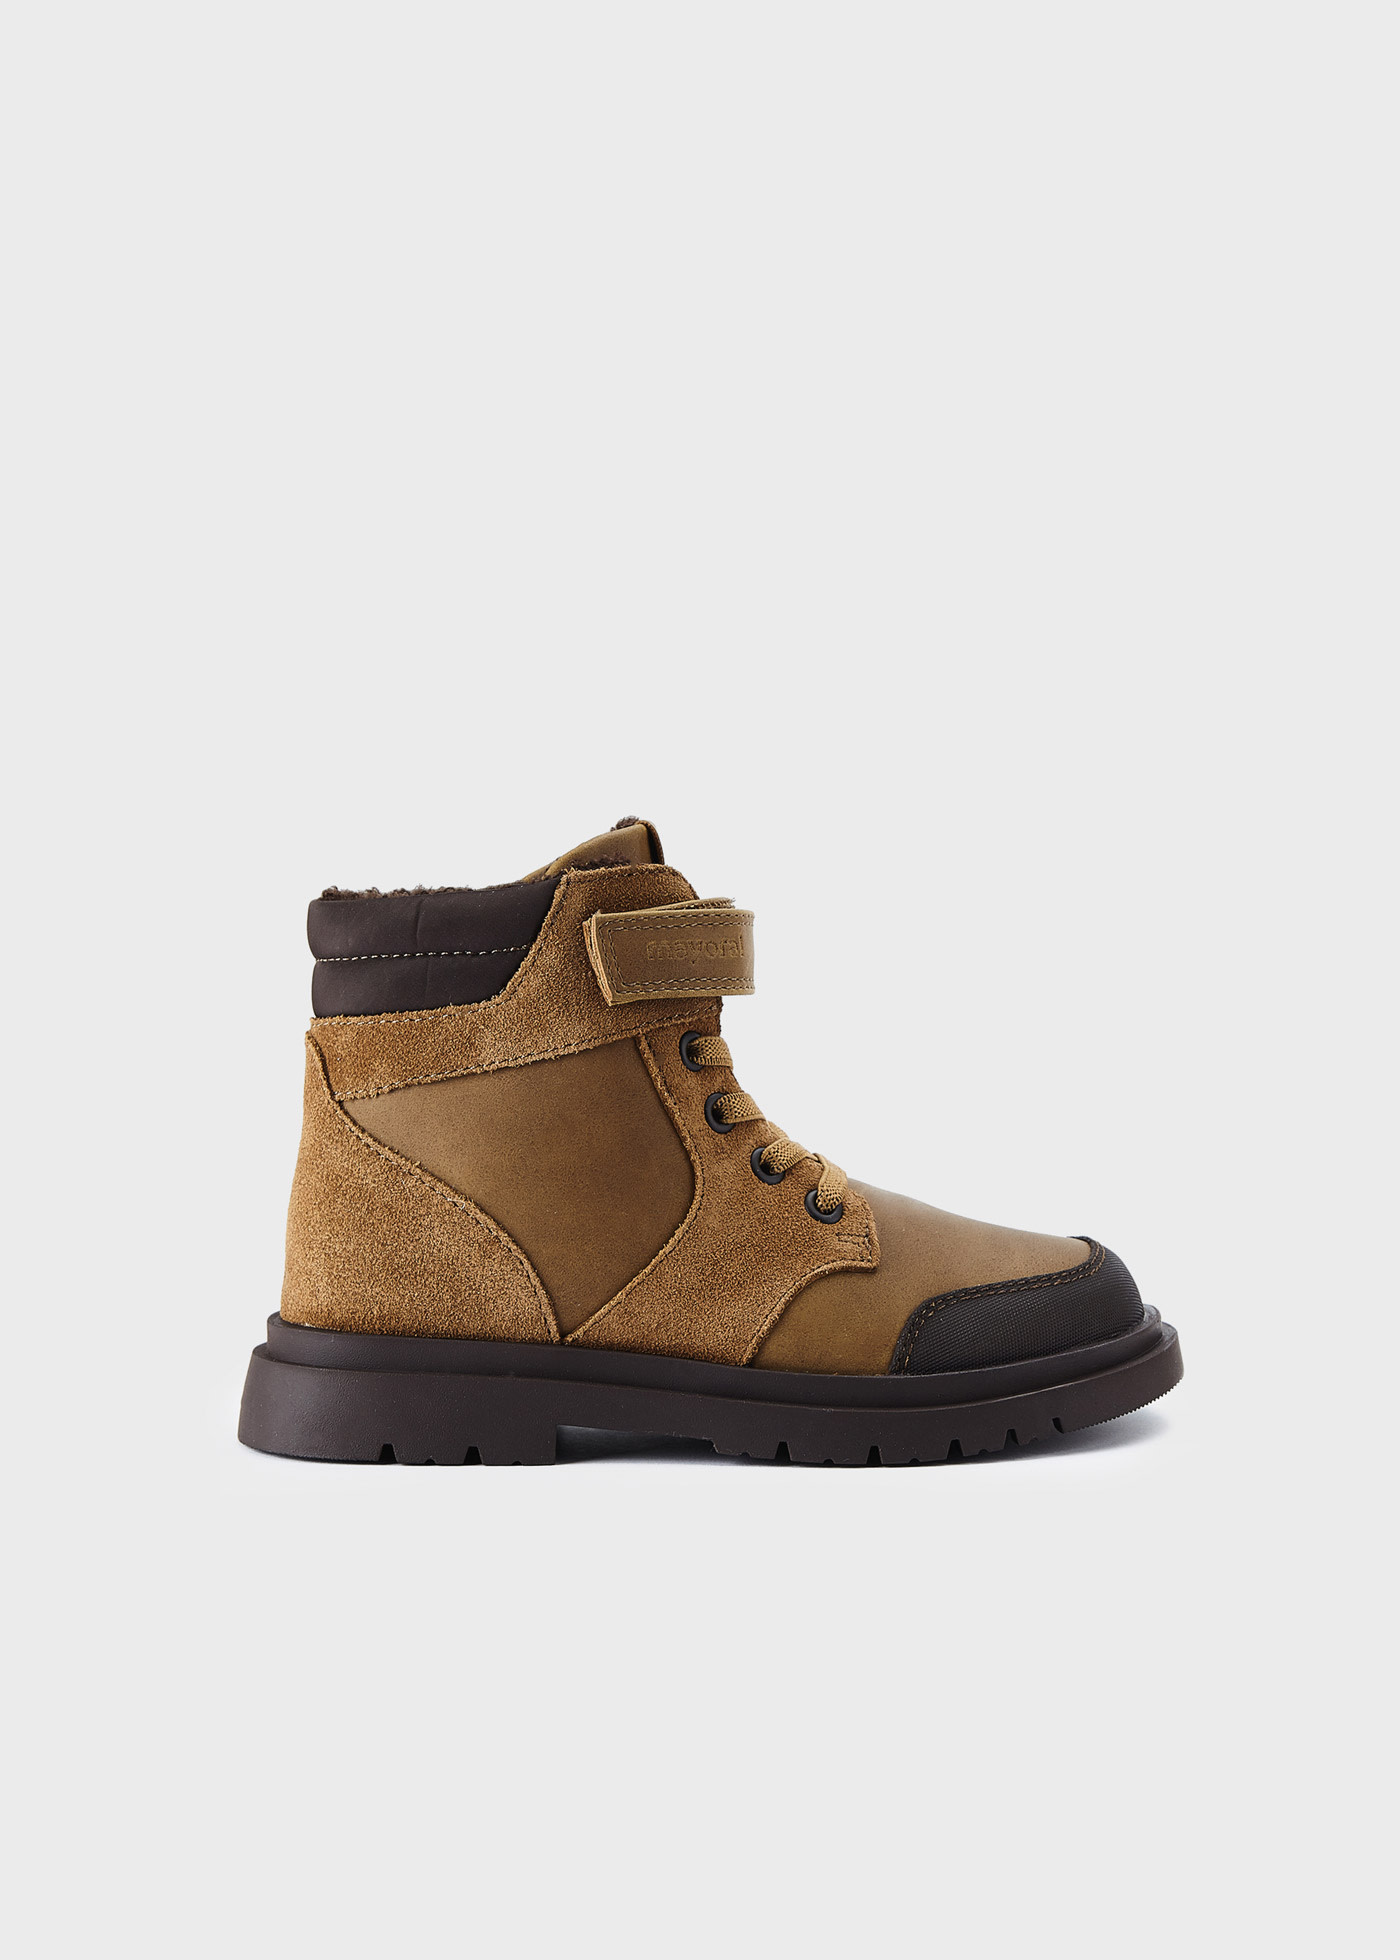 Boy mountain ankle boots sustainable leather